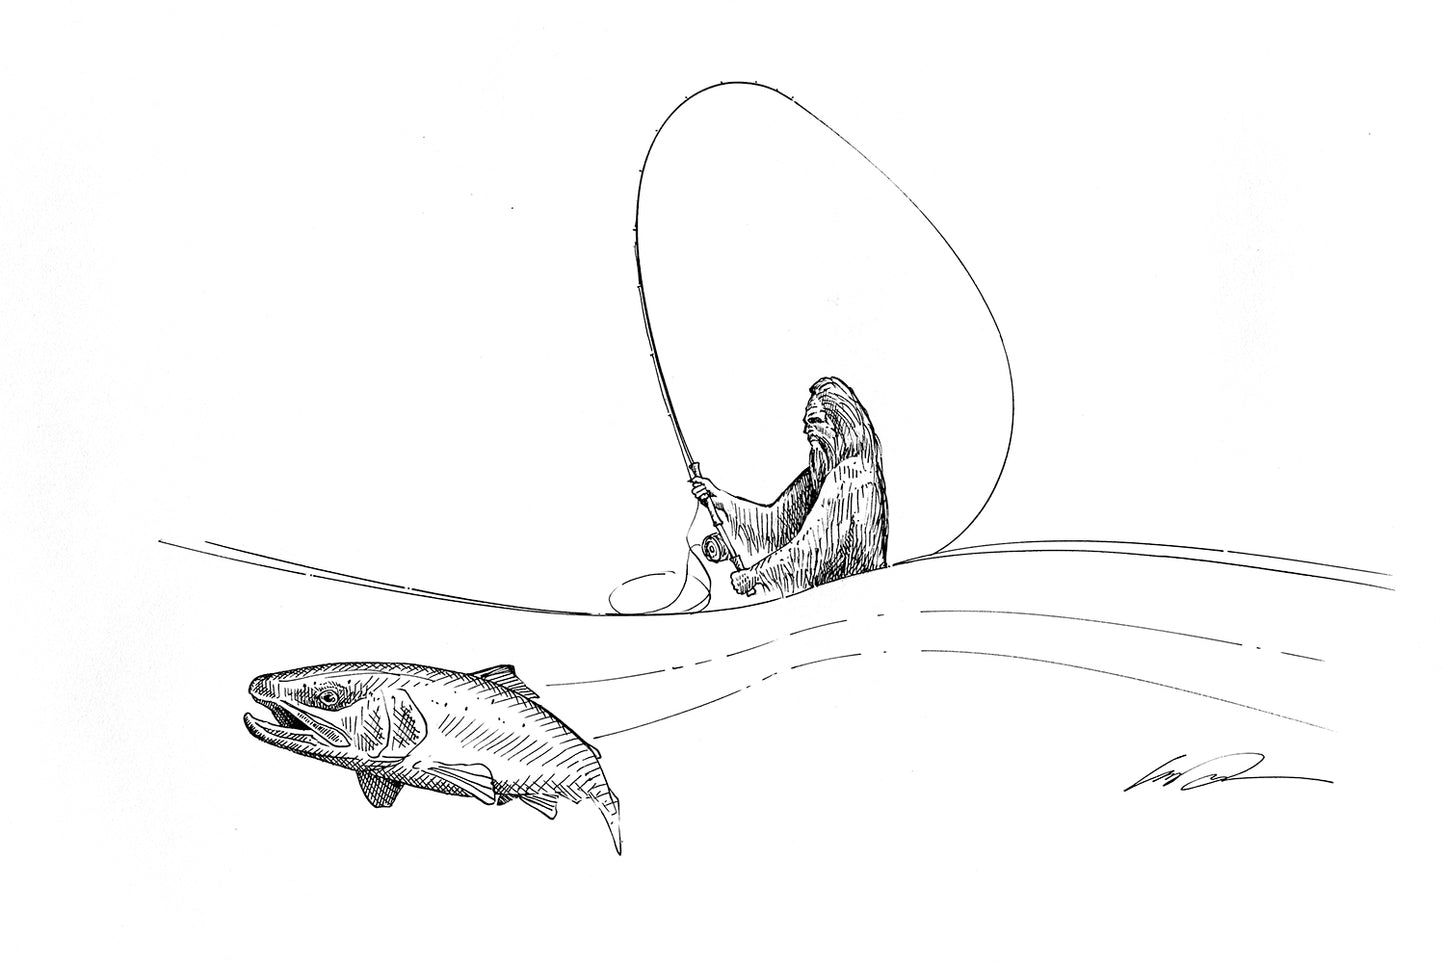 A black and white sketch of a sasquatch casting a spey rod in the background with a trout in the foreground